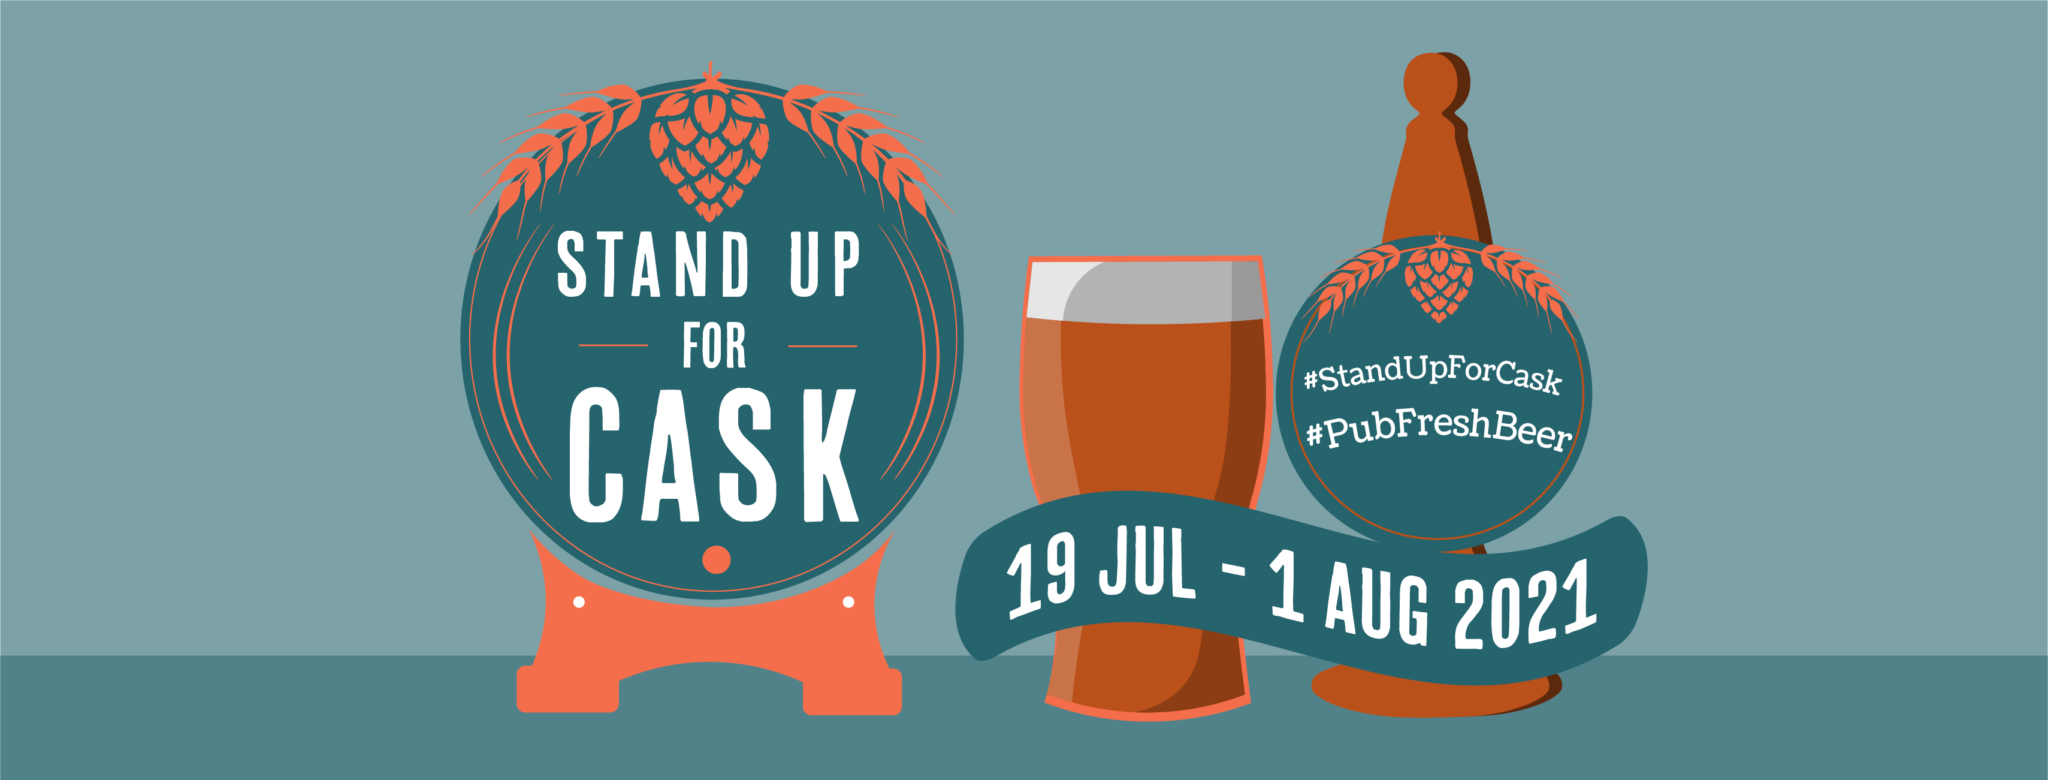 Going to the pub? #StandUpForCask!